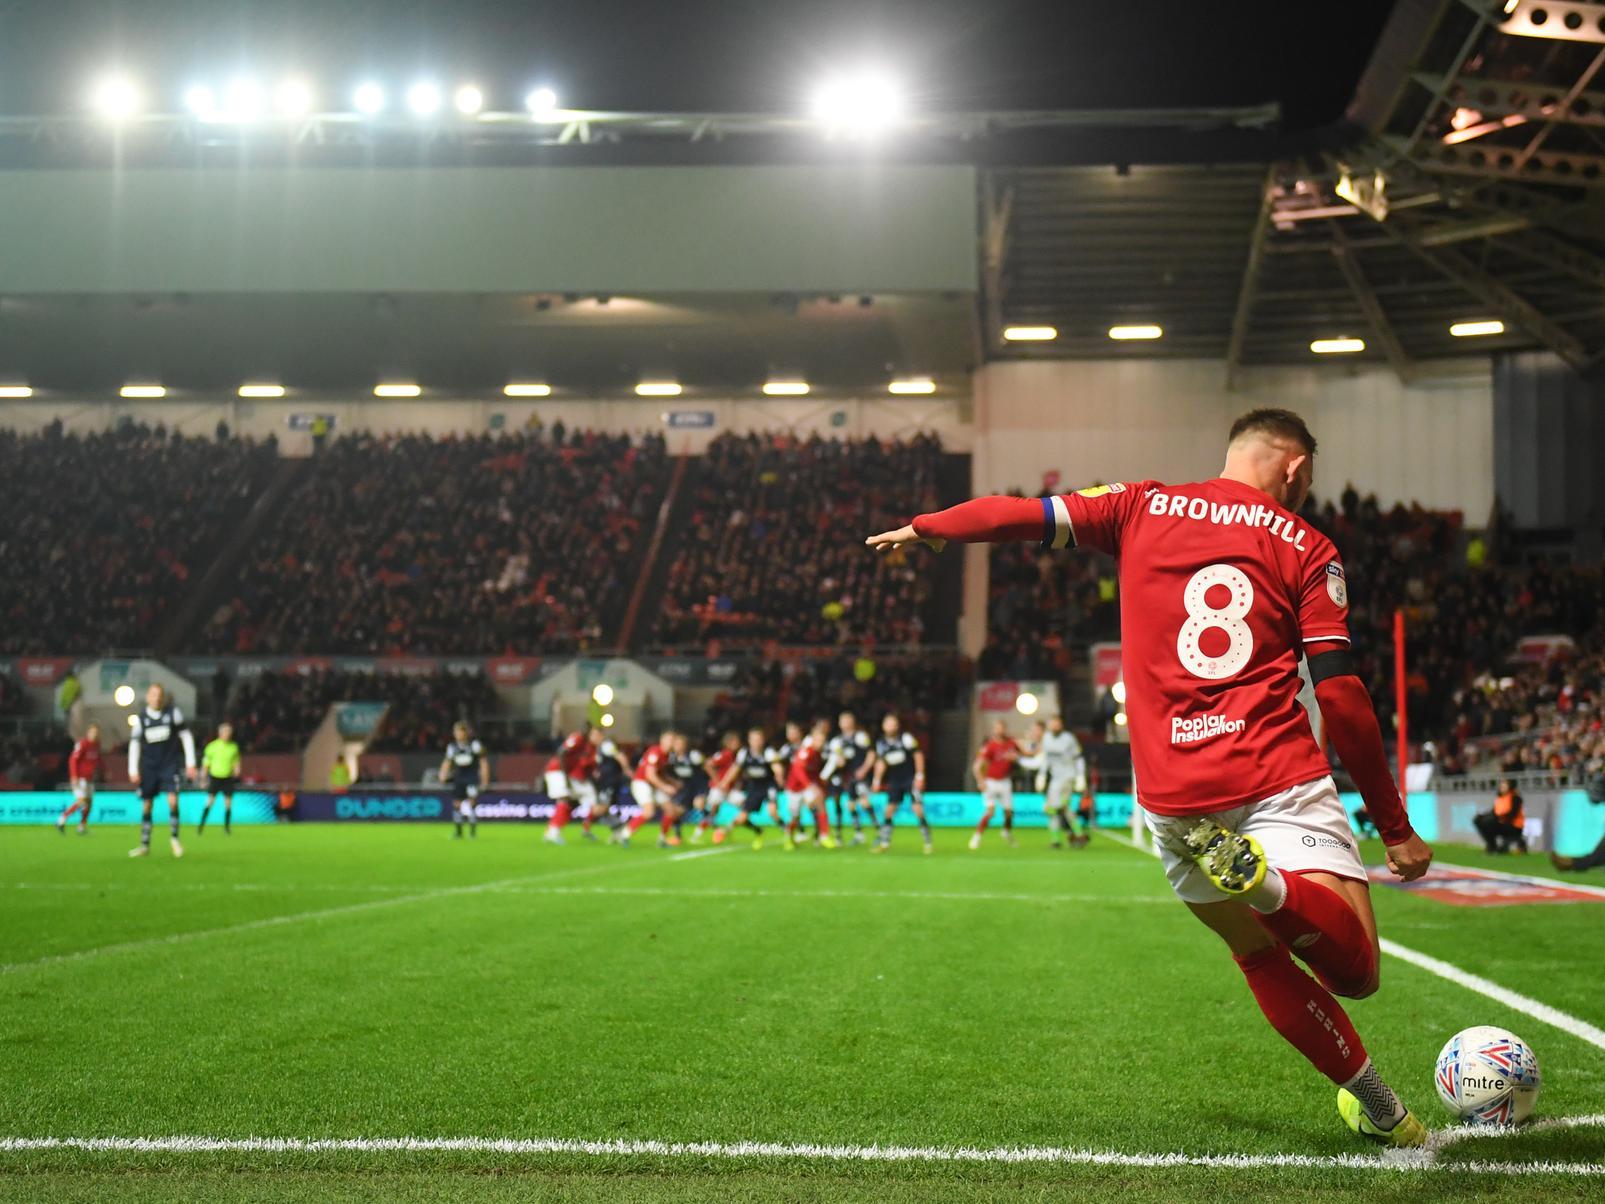 Brighton & Hove Albion are keen on Bristol City midfielder Josh Brownhill. Burnley and Sheffield United have also been working on a deal for the Robins star man. (Bristol Post)